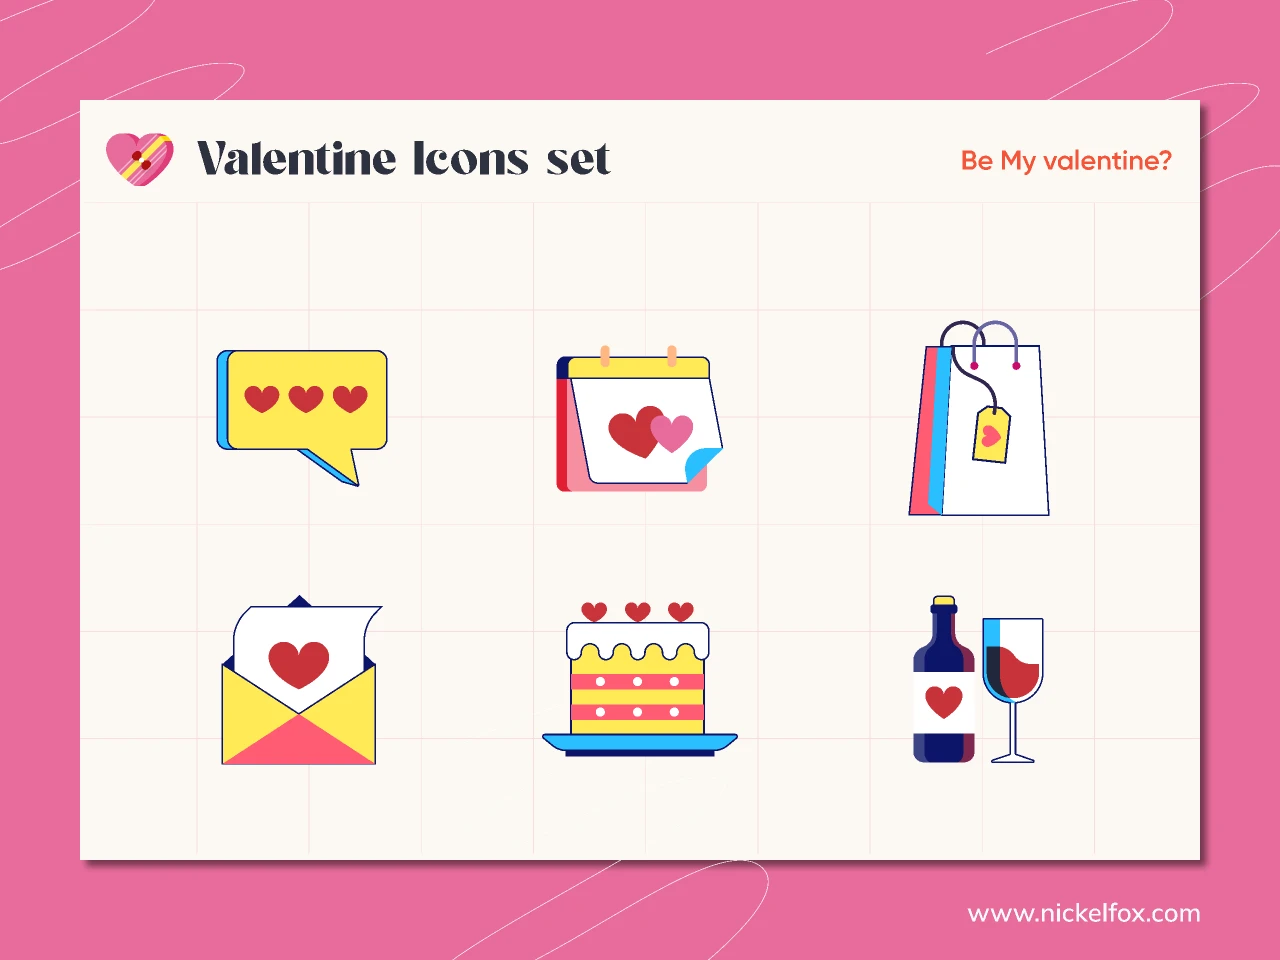 Valentine Icons set for Figma and Adobe XD